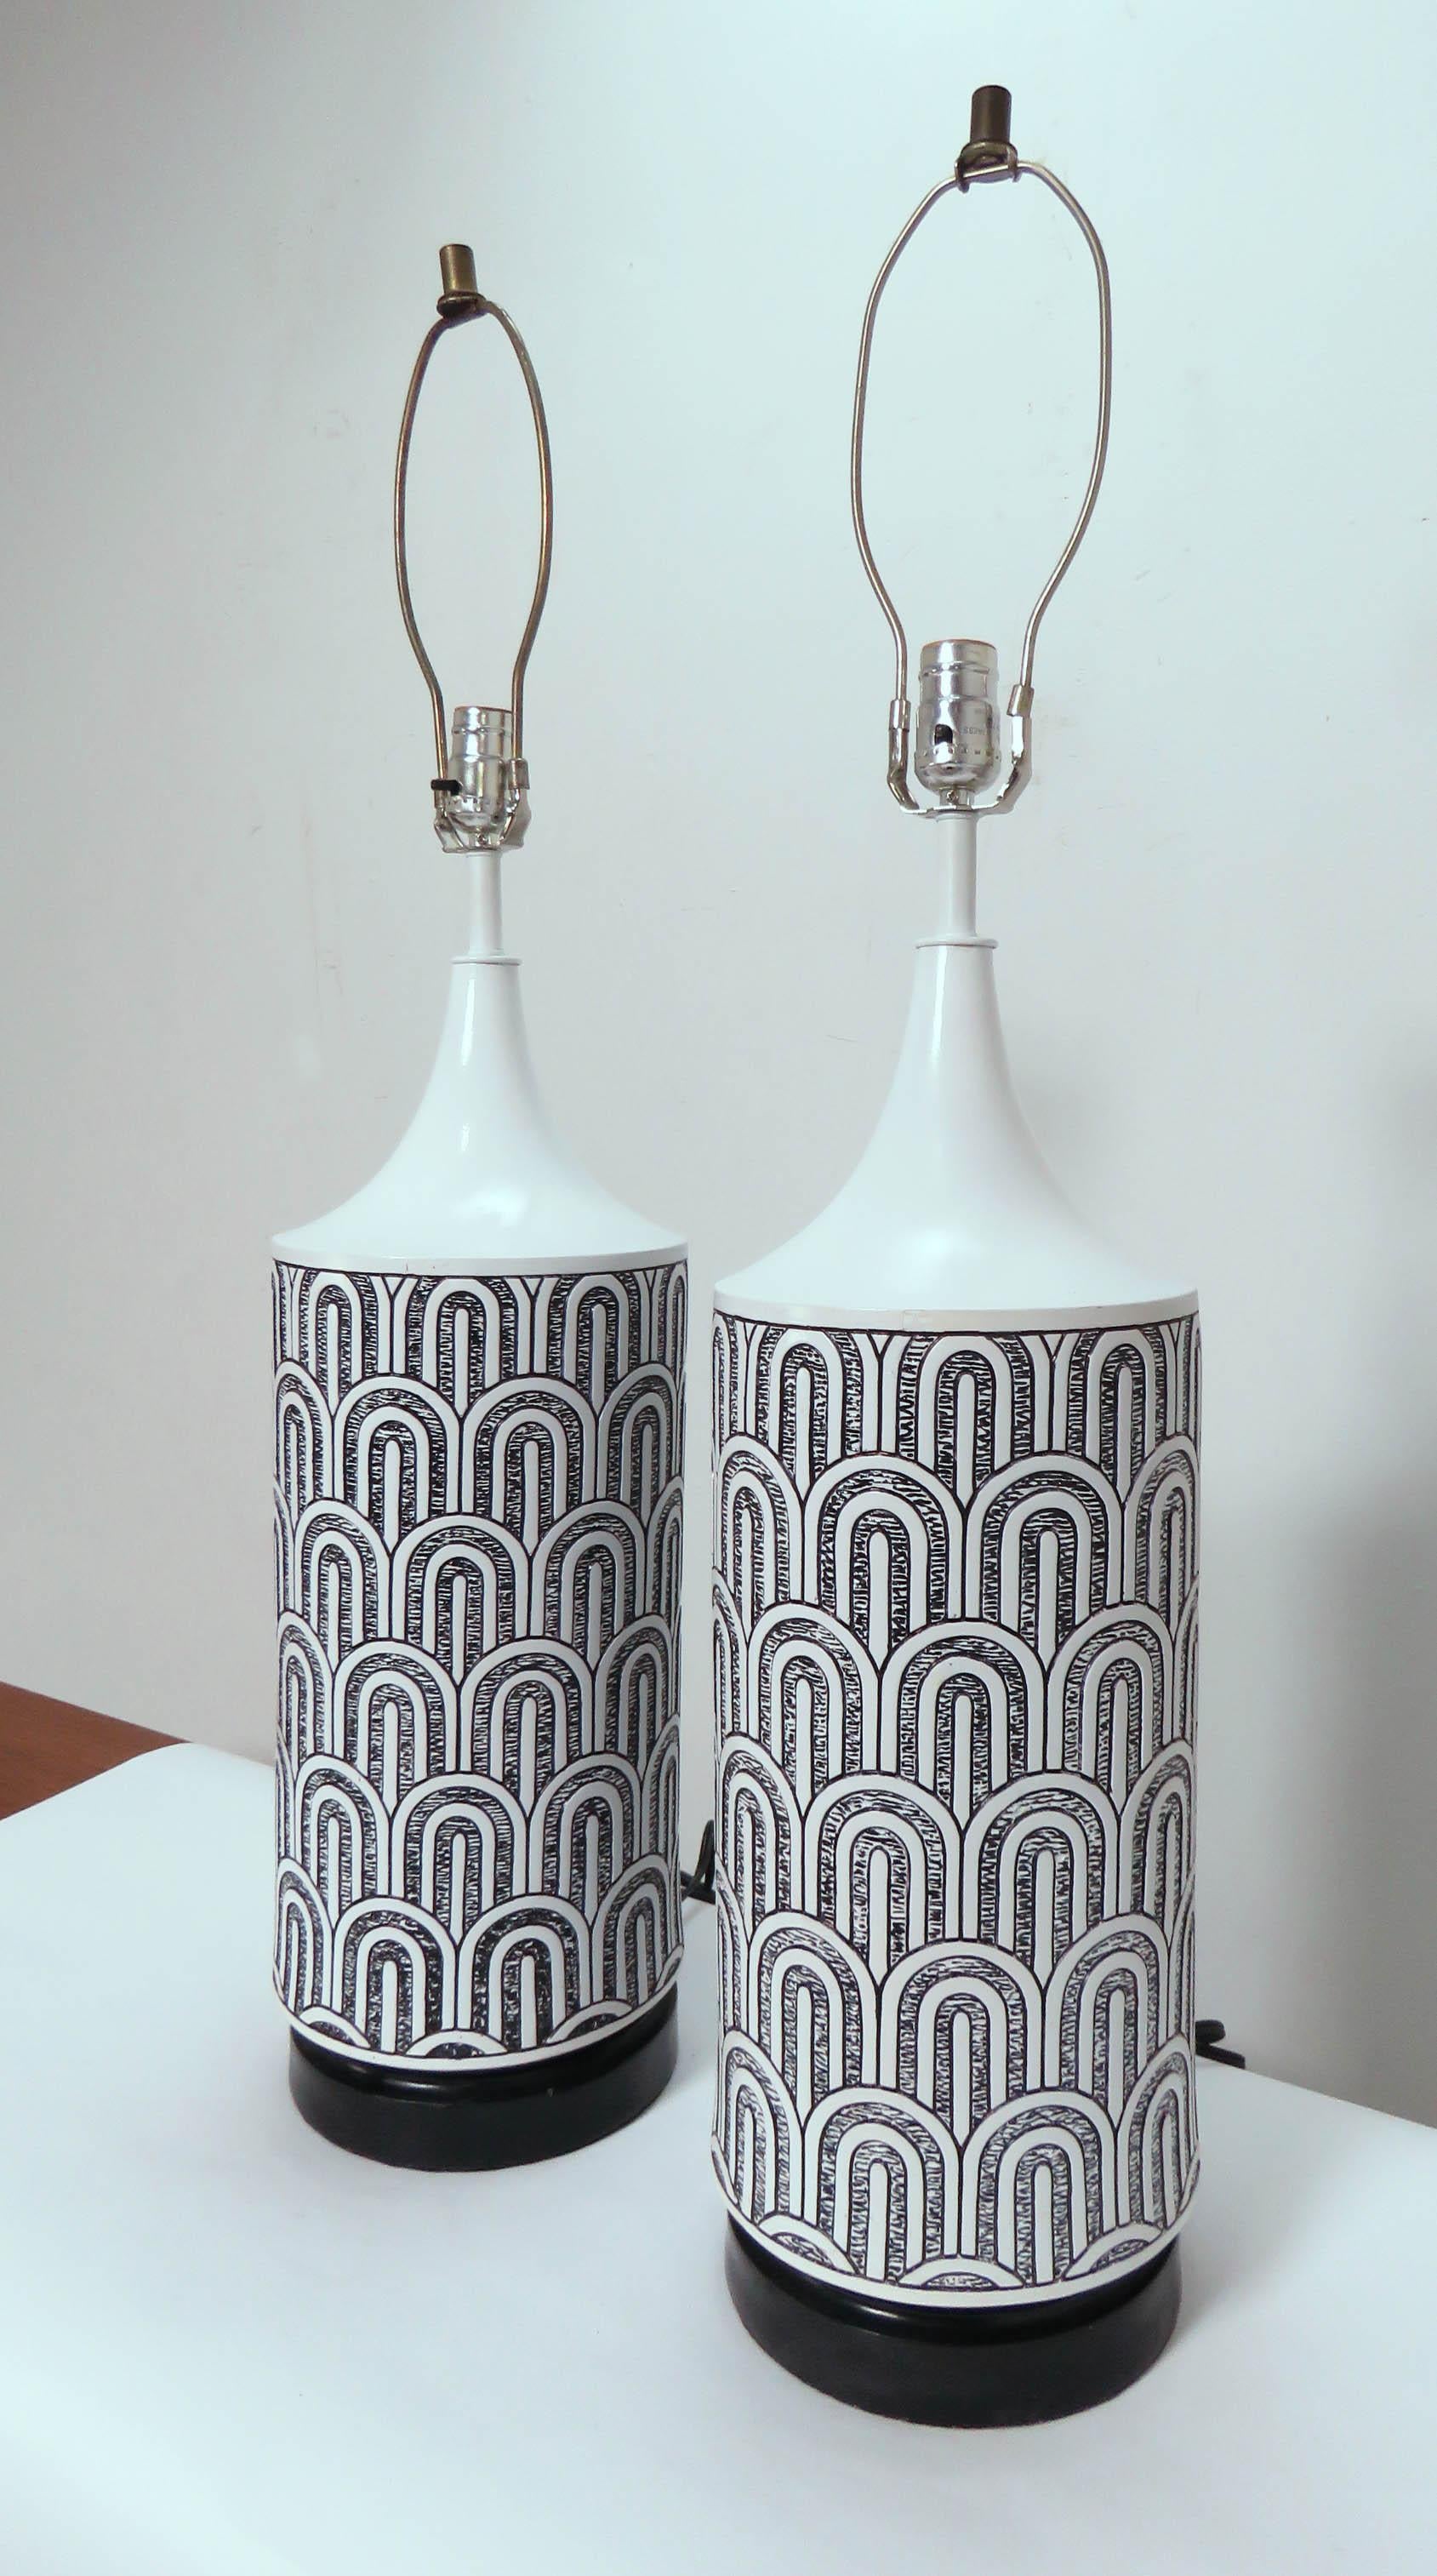 Pair of pottery lamps from the disco era, with a black and white 